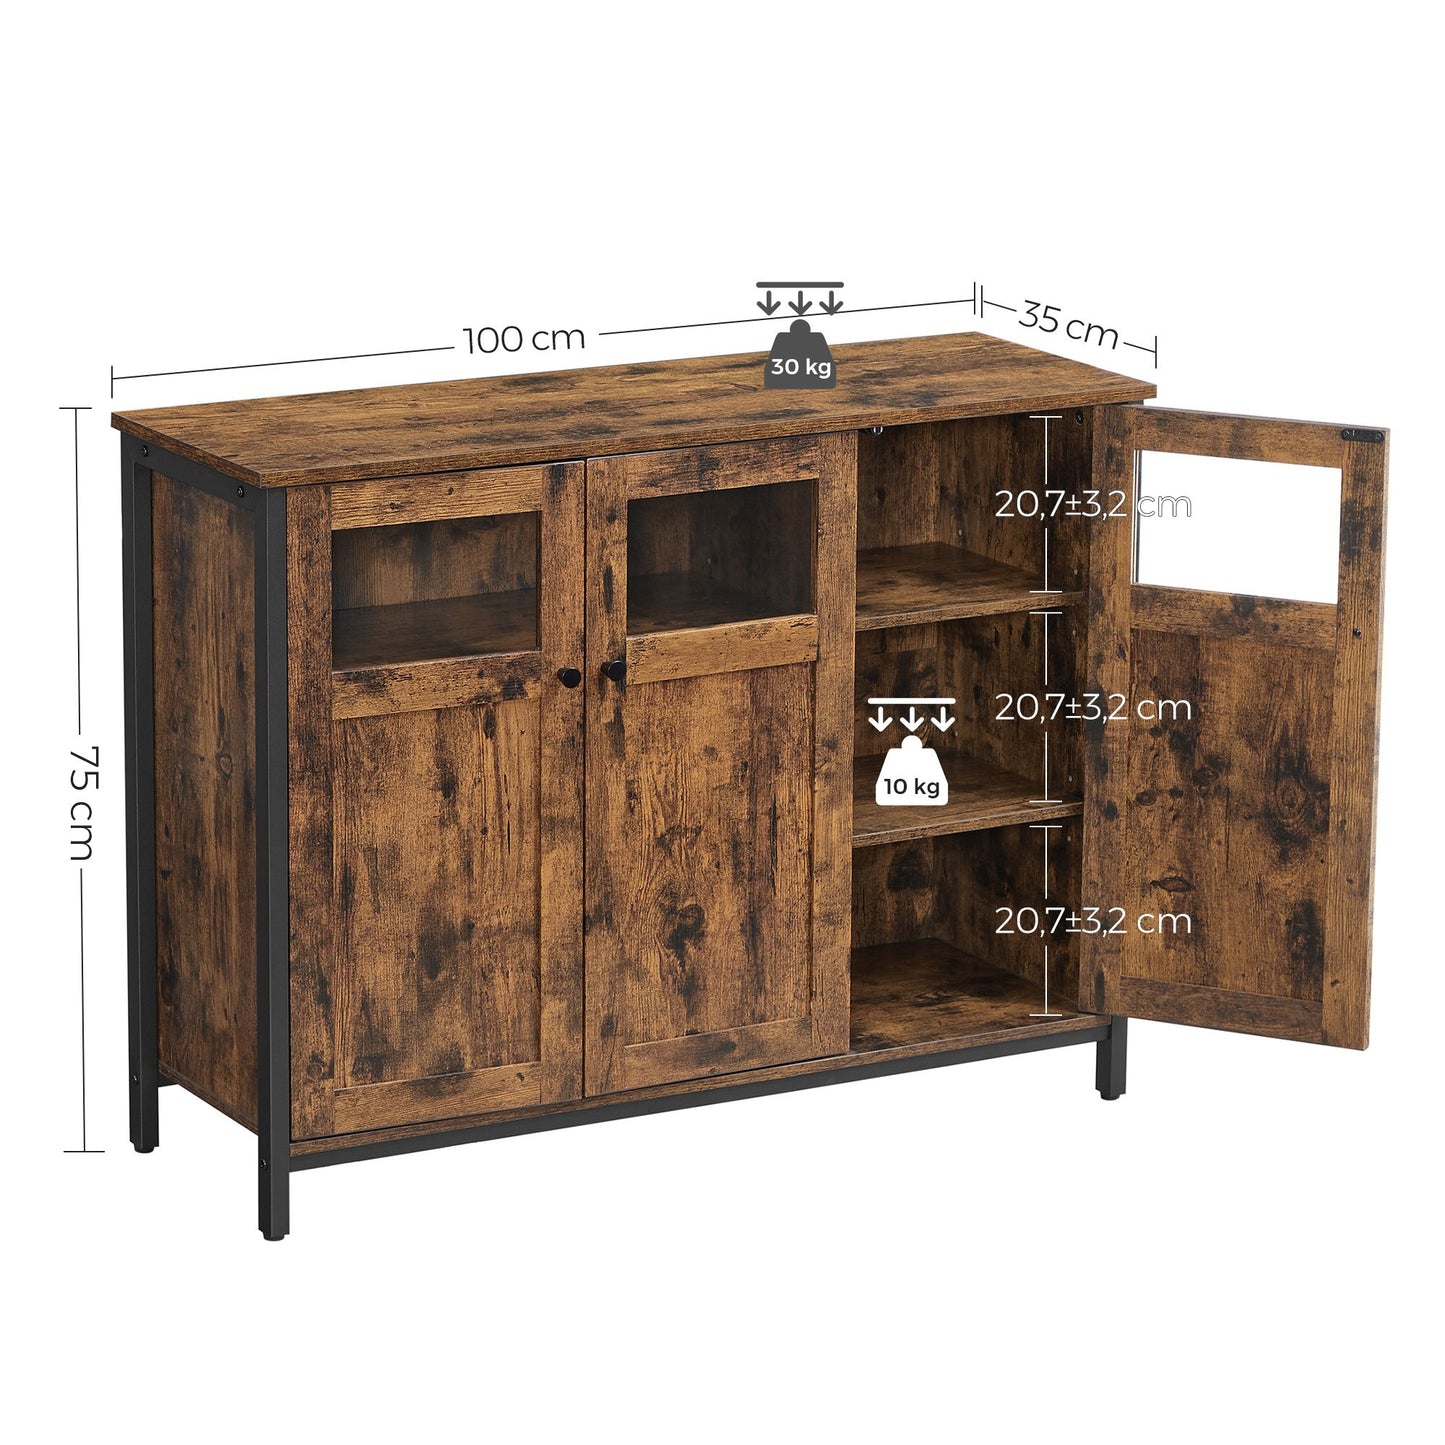 VASAGLE - Sideboard, Buffet Table, Storage Cabinet with Glass Doors, Dining Room, Living Room, Hallway, Kitchen, Steel Frame